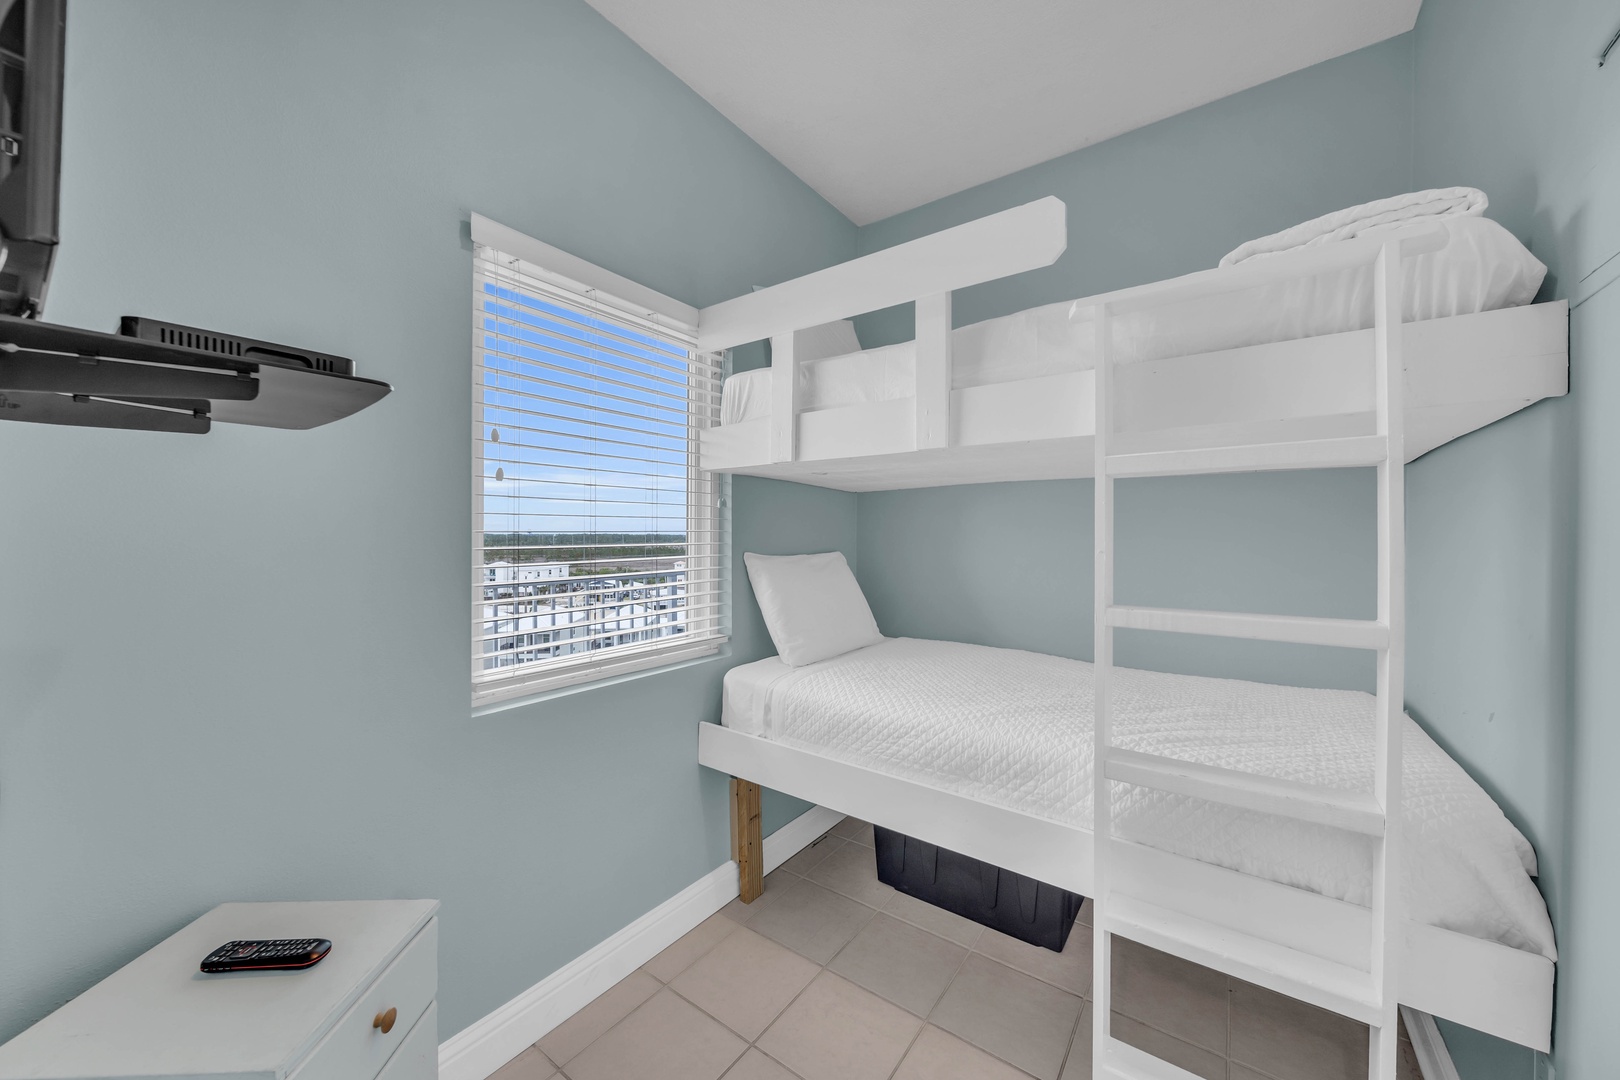 The 2nd room, designed as a bunk room, boasts Twin Bunk Beds. While this room doesn't have a closet, it maximizes your sleeping options.